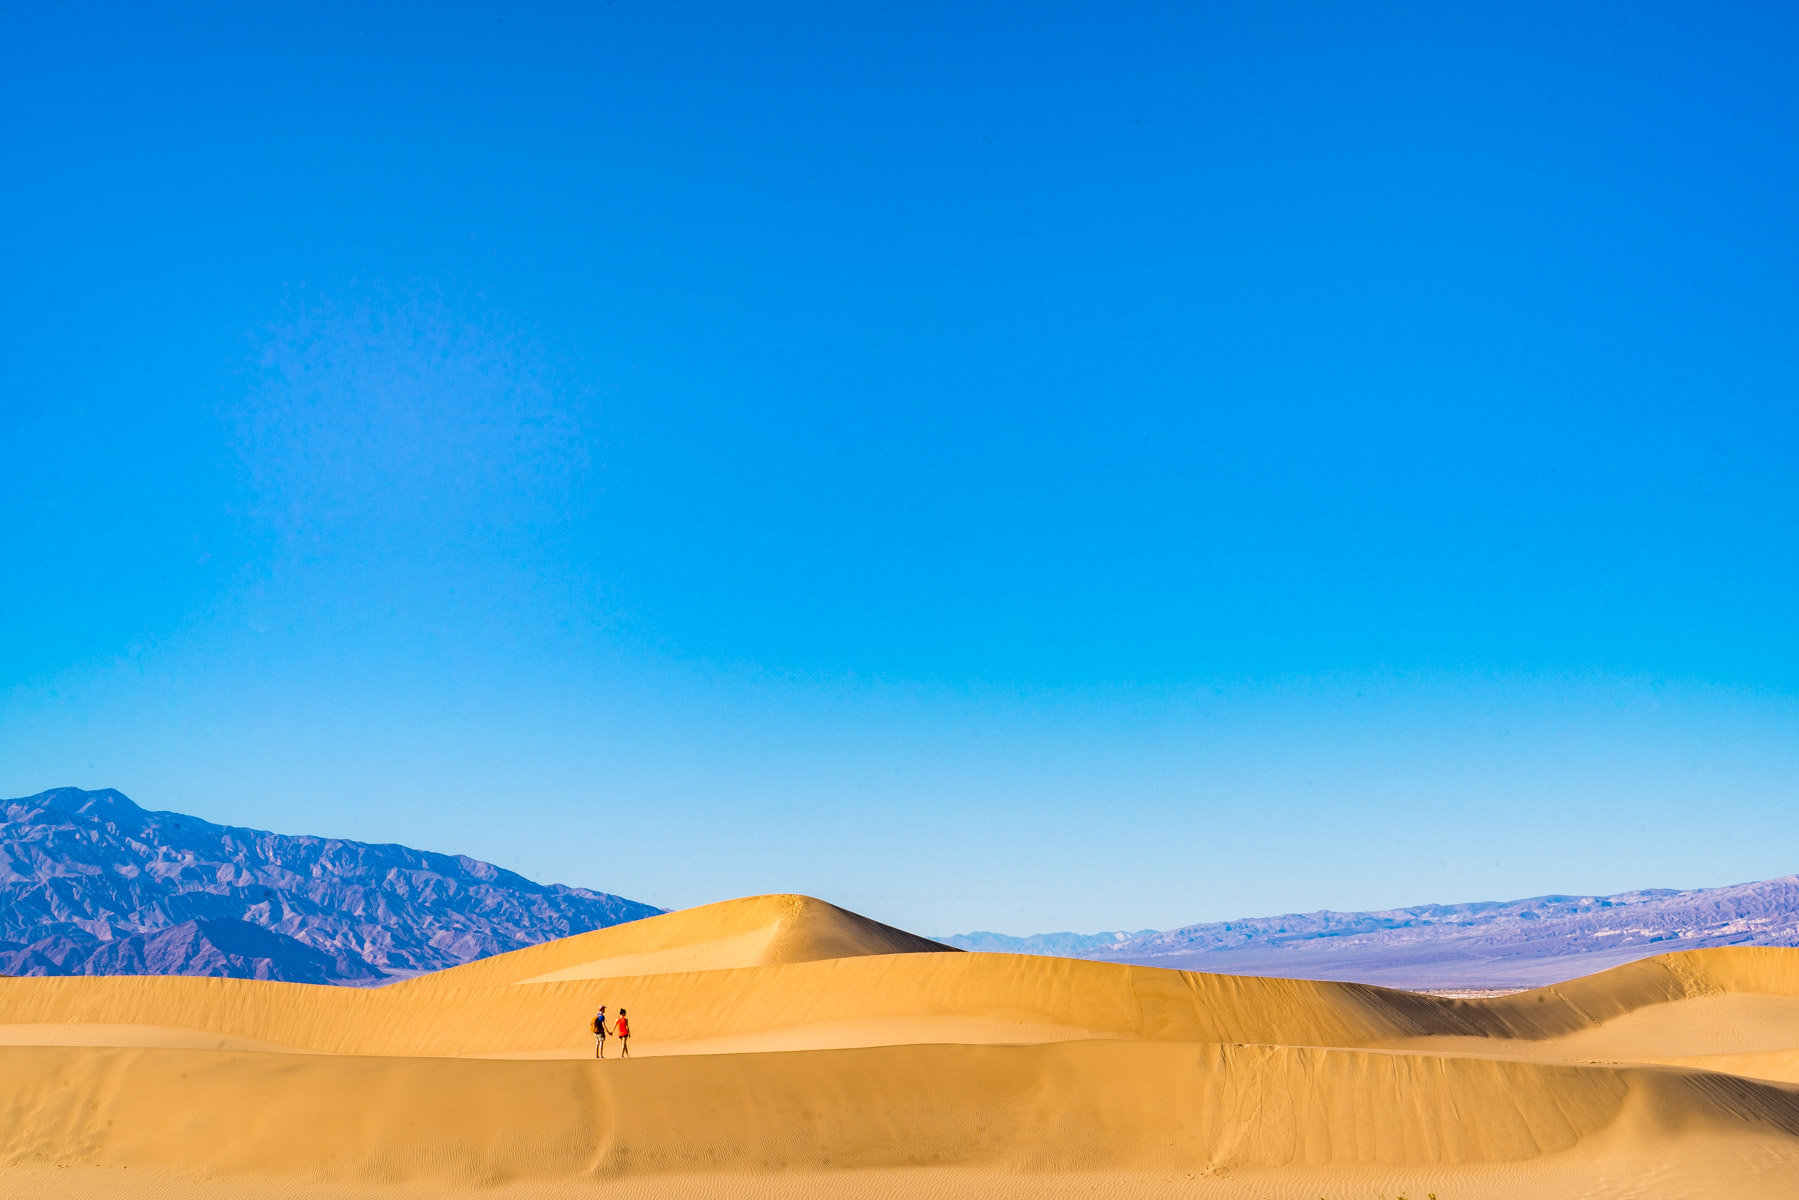 Mesquite Dunes in Death Valley National Park